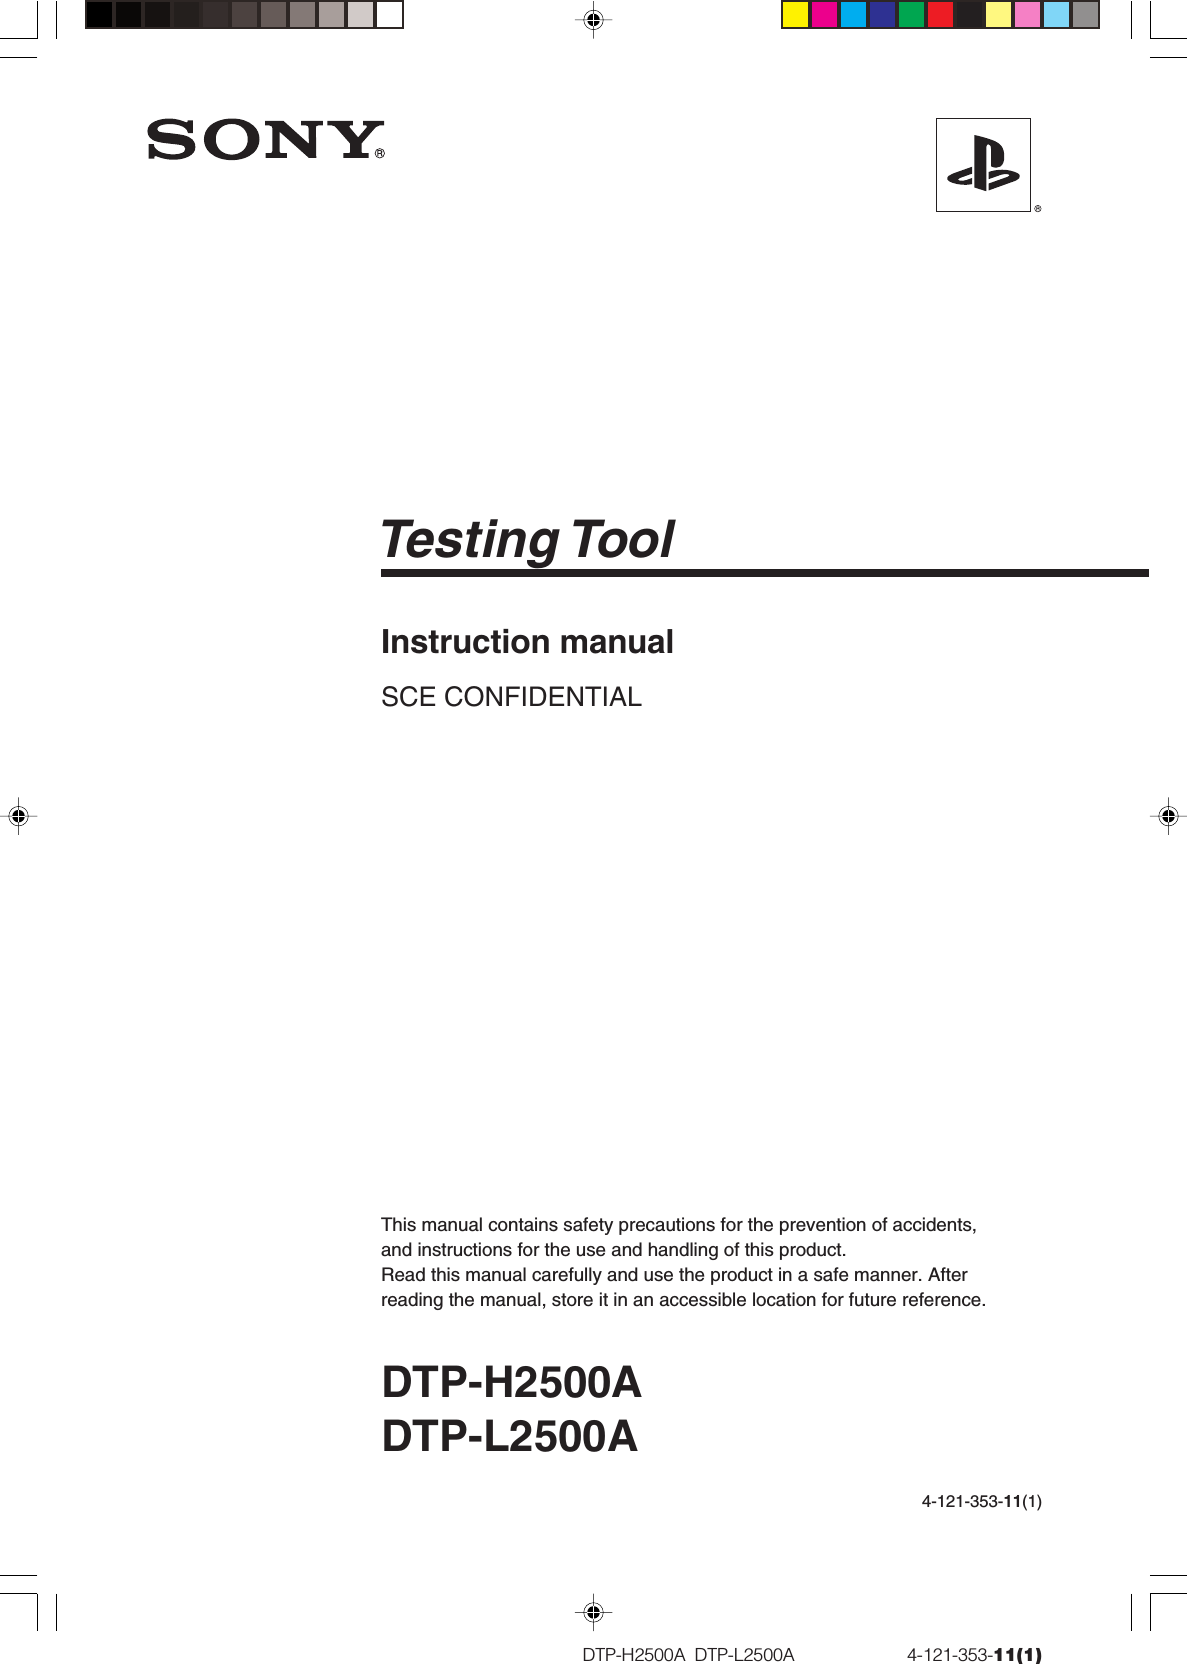 DTP-H2500A  DTP-L2500A                         4-121-353-11(1)Instruction manualSCE CONFIDENTIALDTP-H2500ADTP-L2500ATesting ToolThis manual contains safety precautions for the prevention of accidents,and instructions for the use and handling of this product.Read this manual carefully and use the product in a safe manner. Afterreading the manual, store it in an accessible location for future reference.4-121-353-11(1)